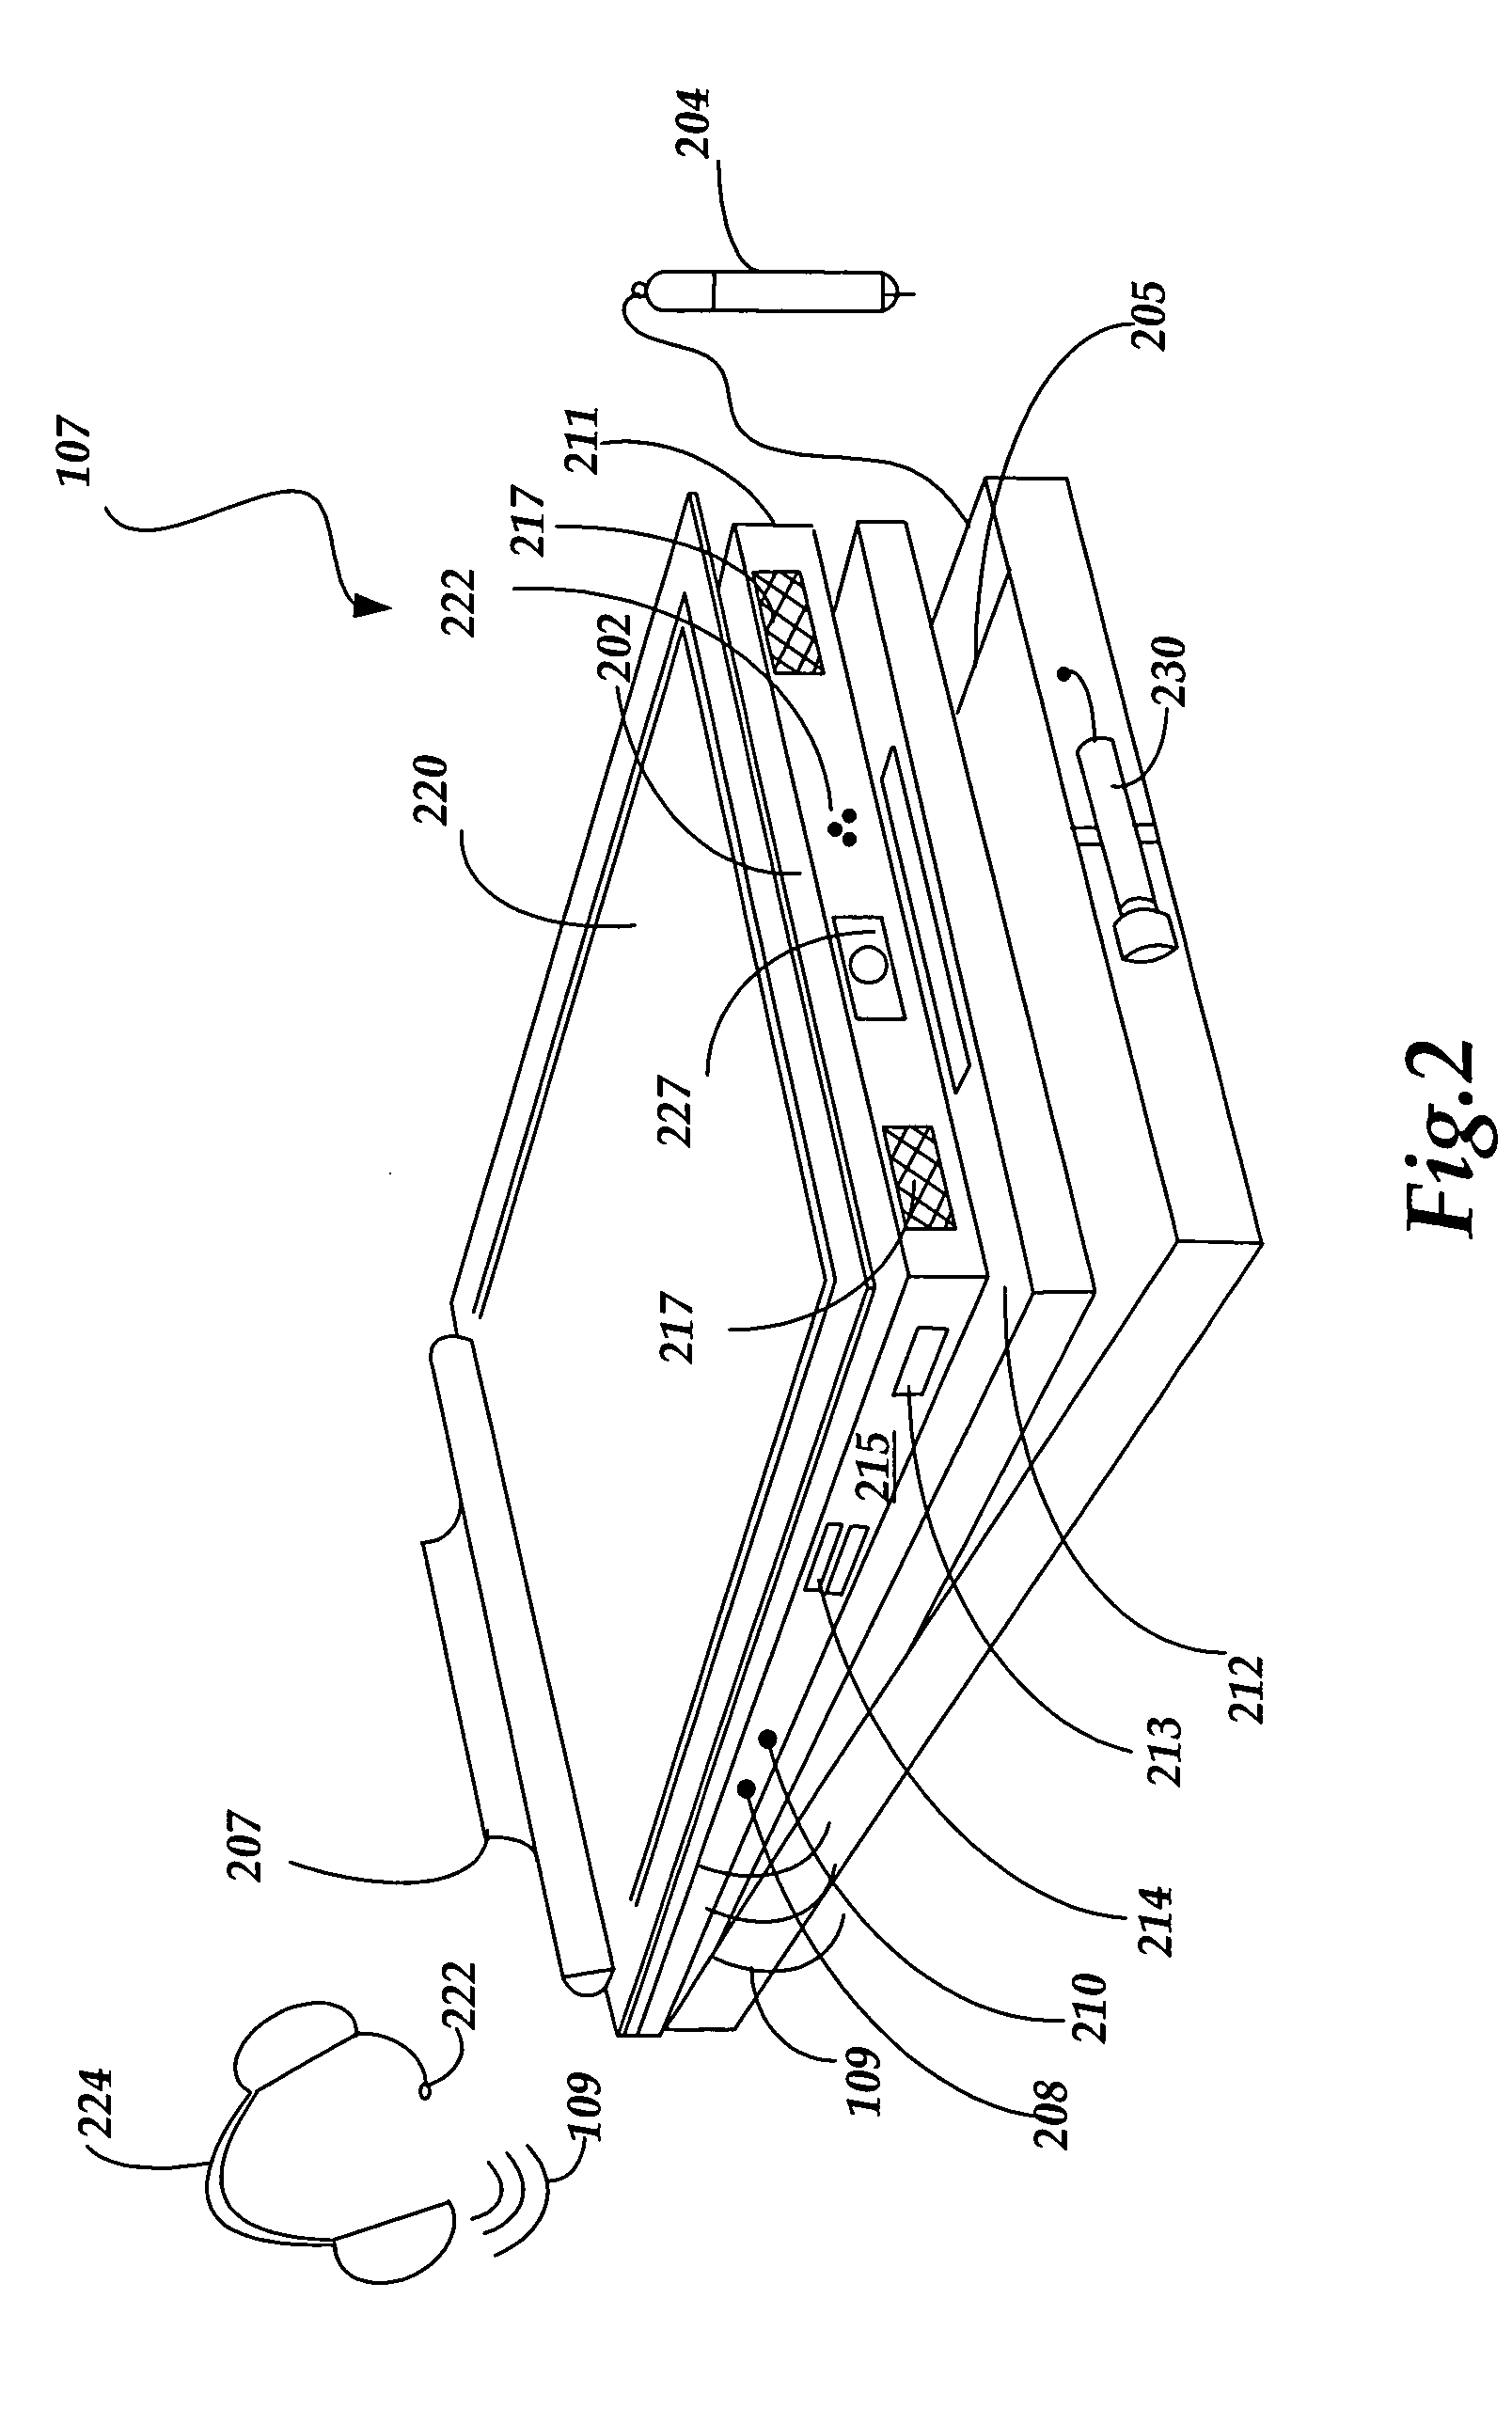 Acquiring and processing data associated with an incident among multiple networked computing apparatuses